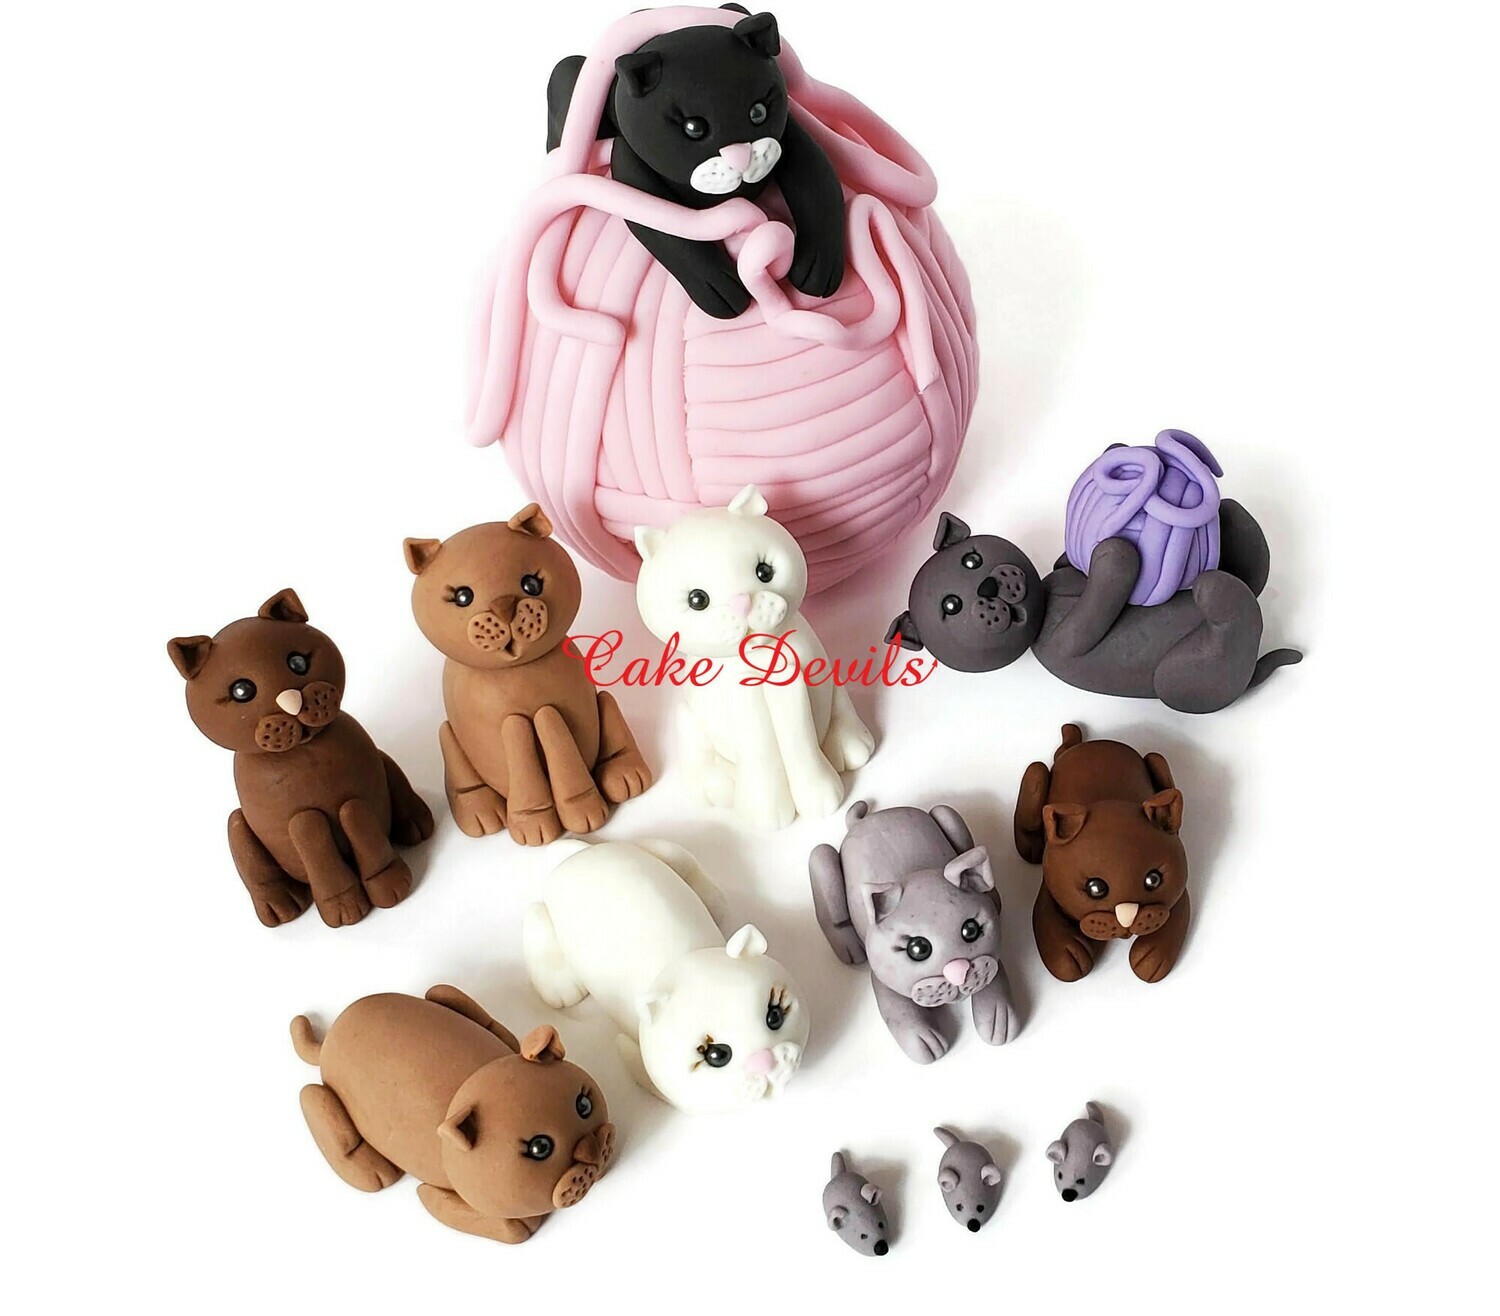 Fondant Cat Cake Toppers, Cats, Yarn, Mice, Handmade Cats with Yarn Balls Cake Decorations great for a birthday or retirement cake!